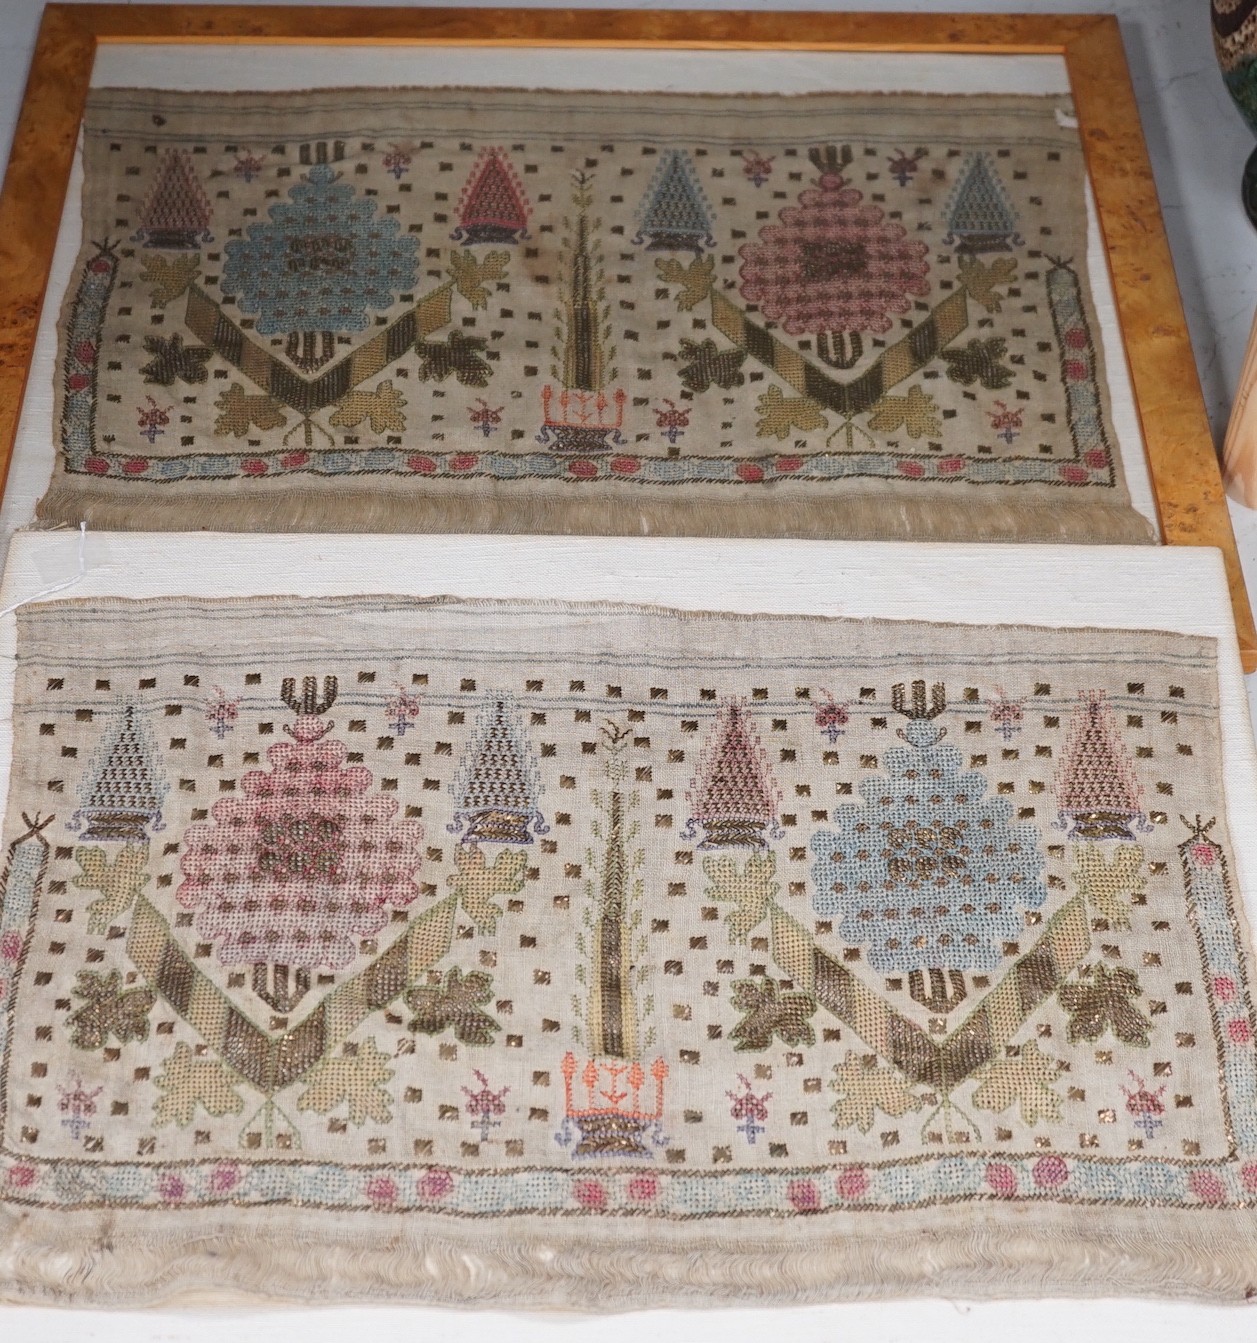 Two 19th century embroidered Turkish towel ends, one framed, 46cms wide x 30cms high